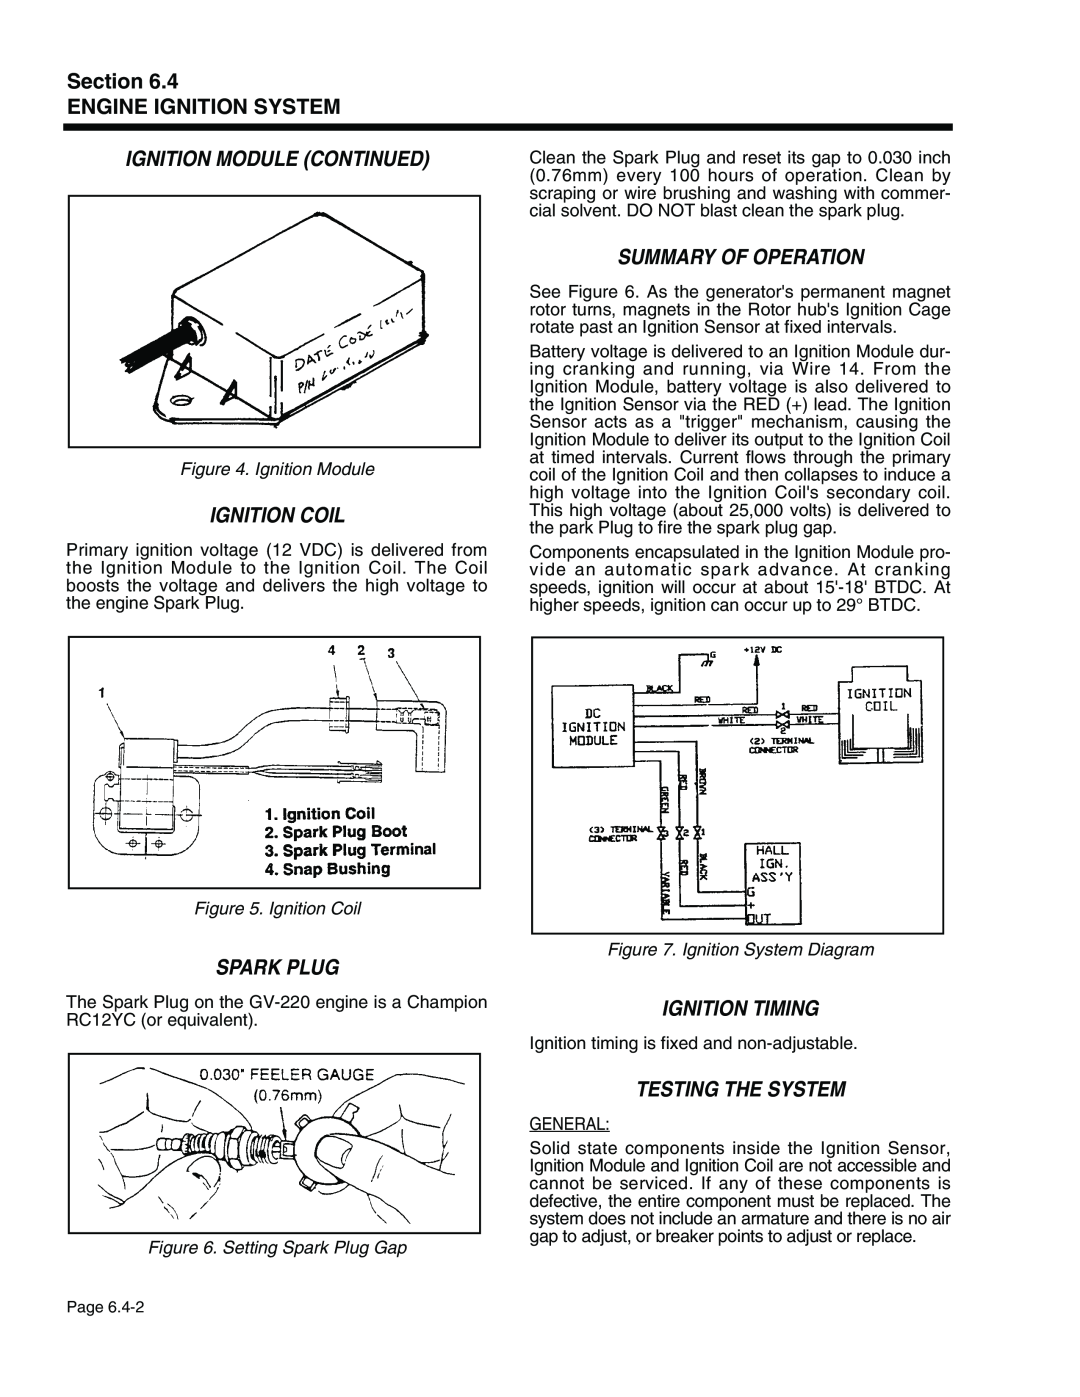 Generac Power Systems 940-2 Ignition Module Continued, Ignition Coil, Summary Of Operation, Spark Plug, Ignition Timing 